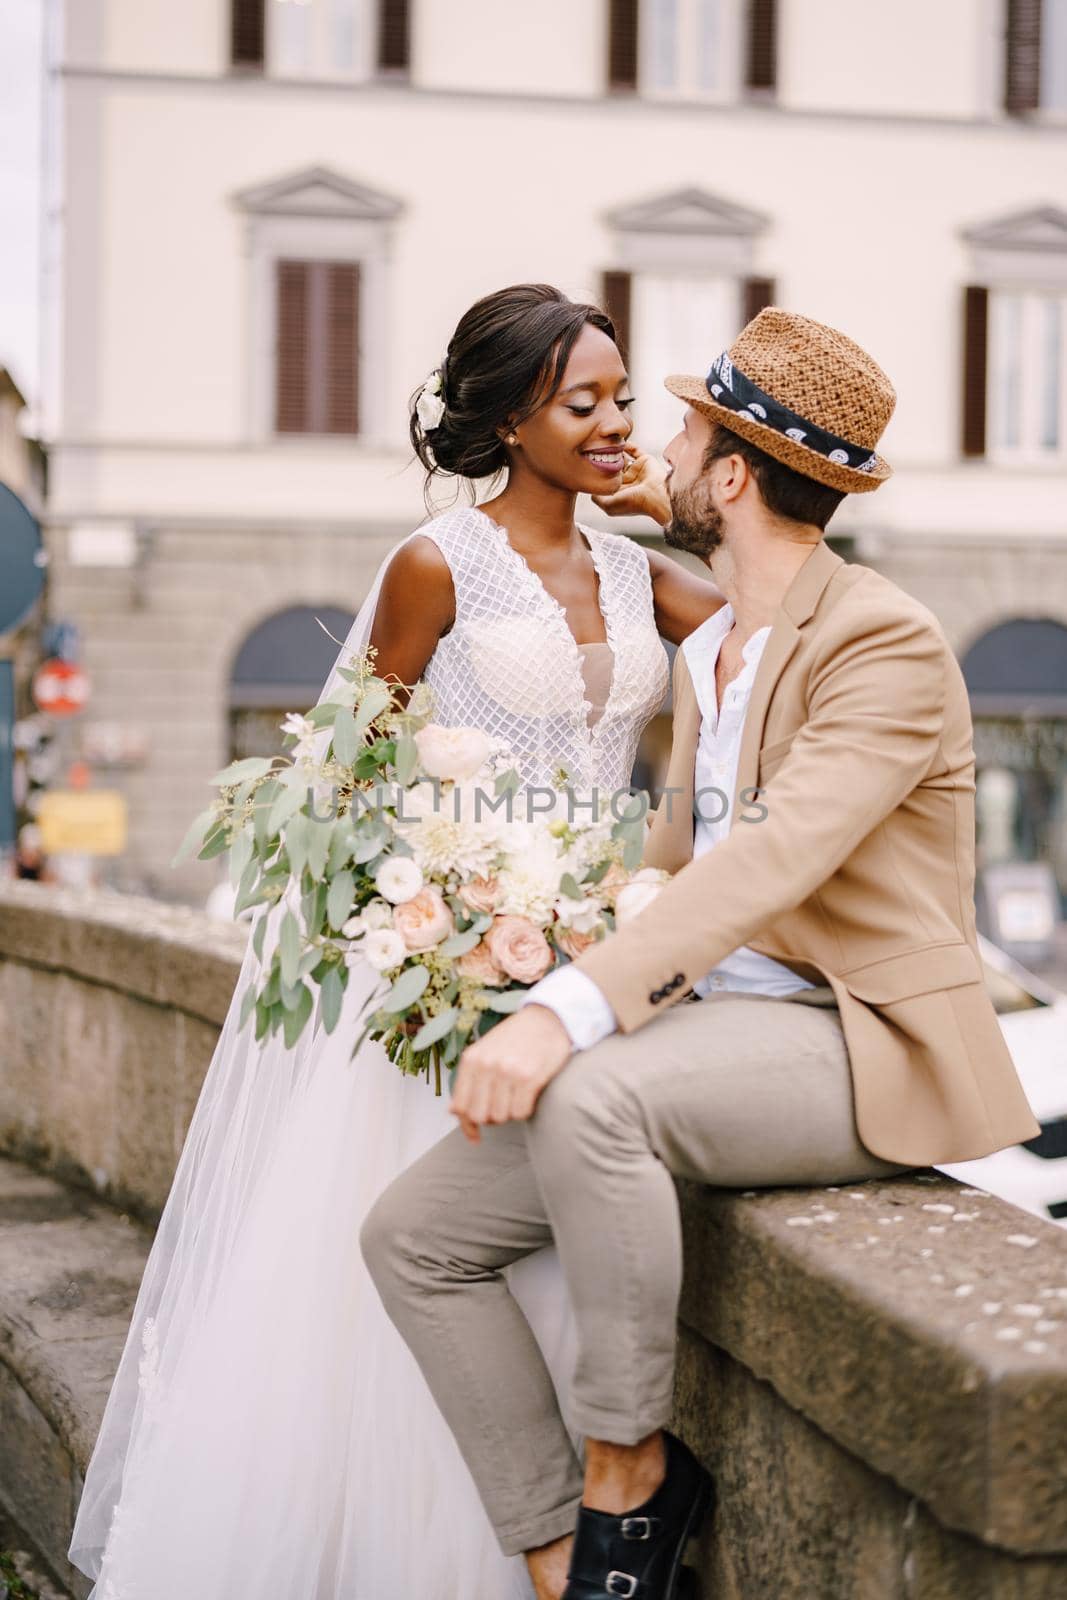 Wedding in Florence, Italy. Interracial wedding couple. African-American bride in a white dress with a long veil and a bouquet, and Caucasian groom in a sandy jacket and straw hat. by Nadtochiy